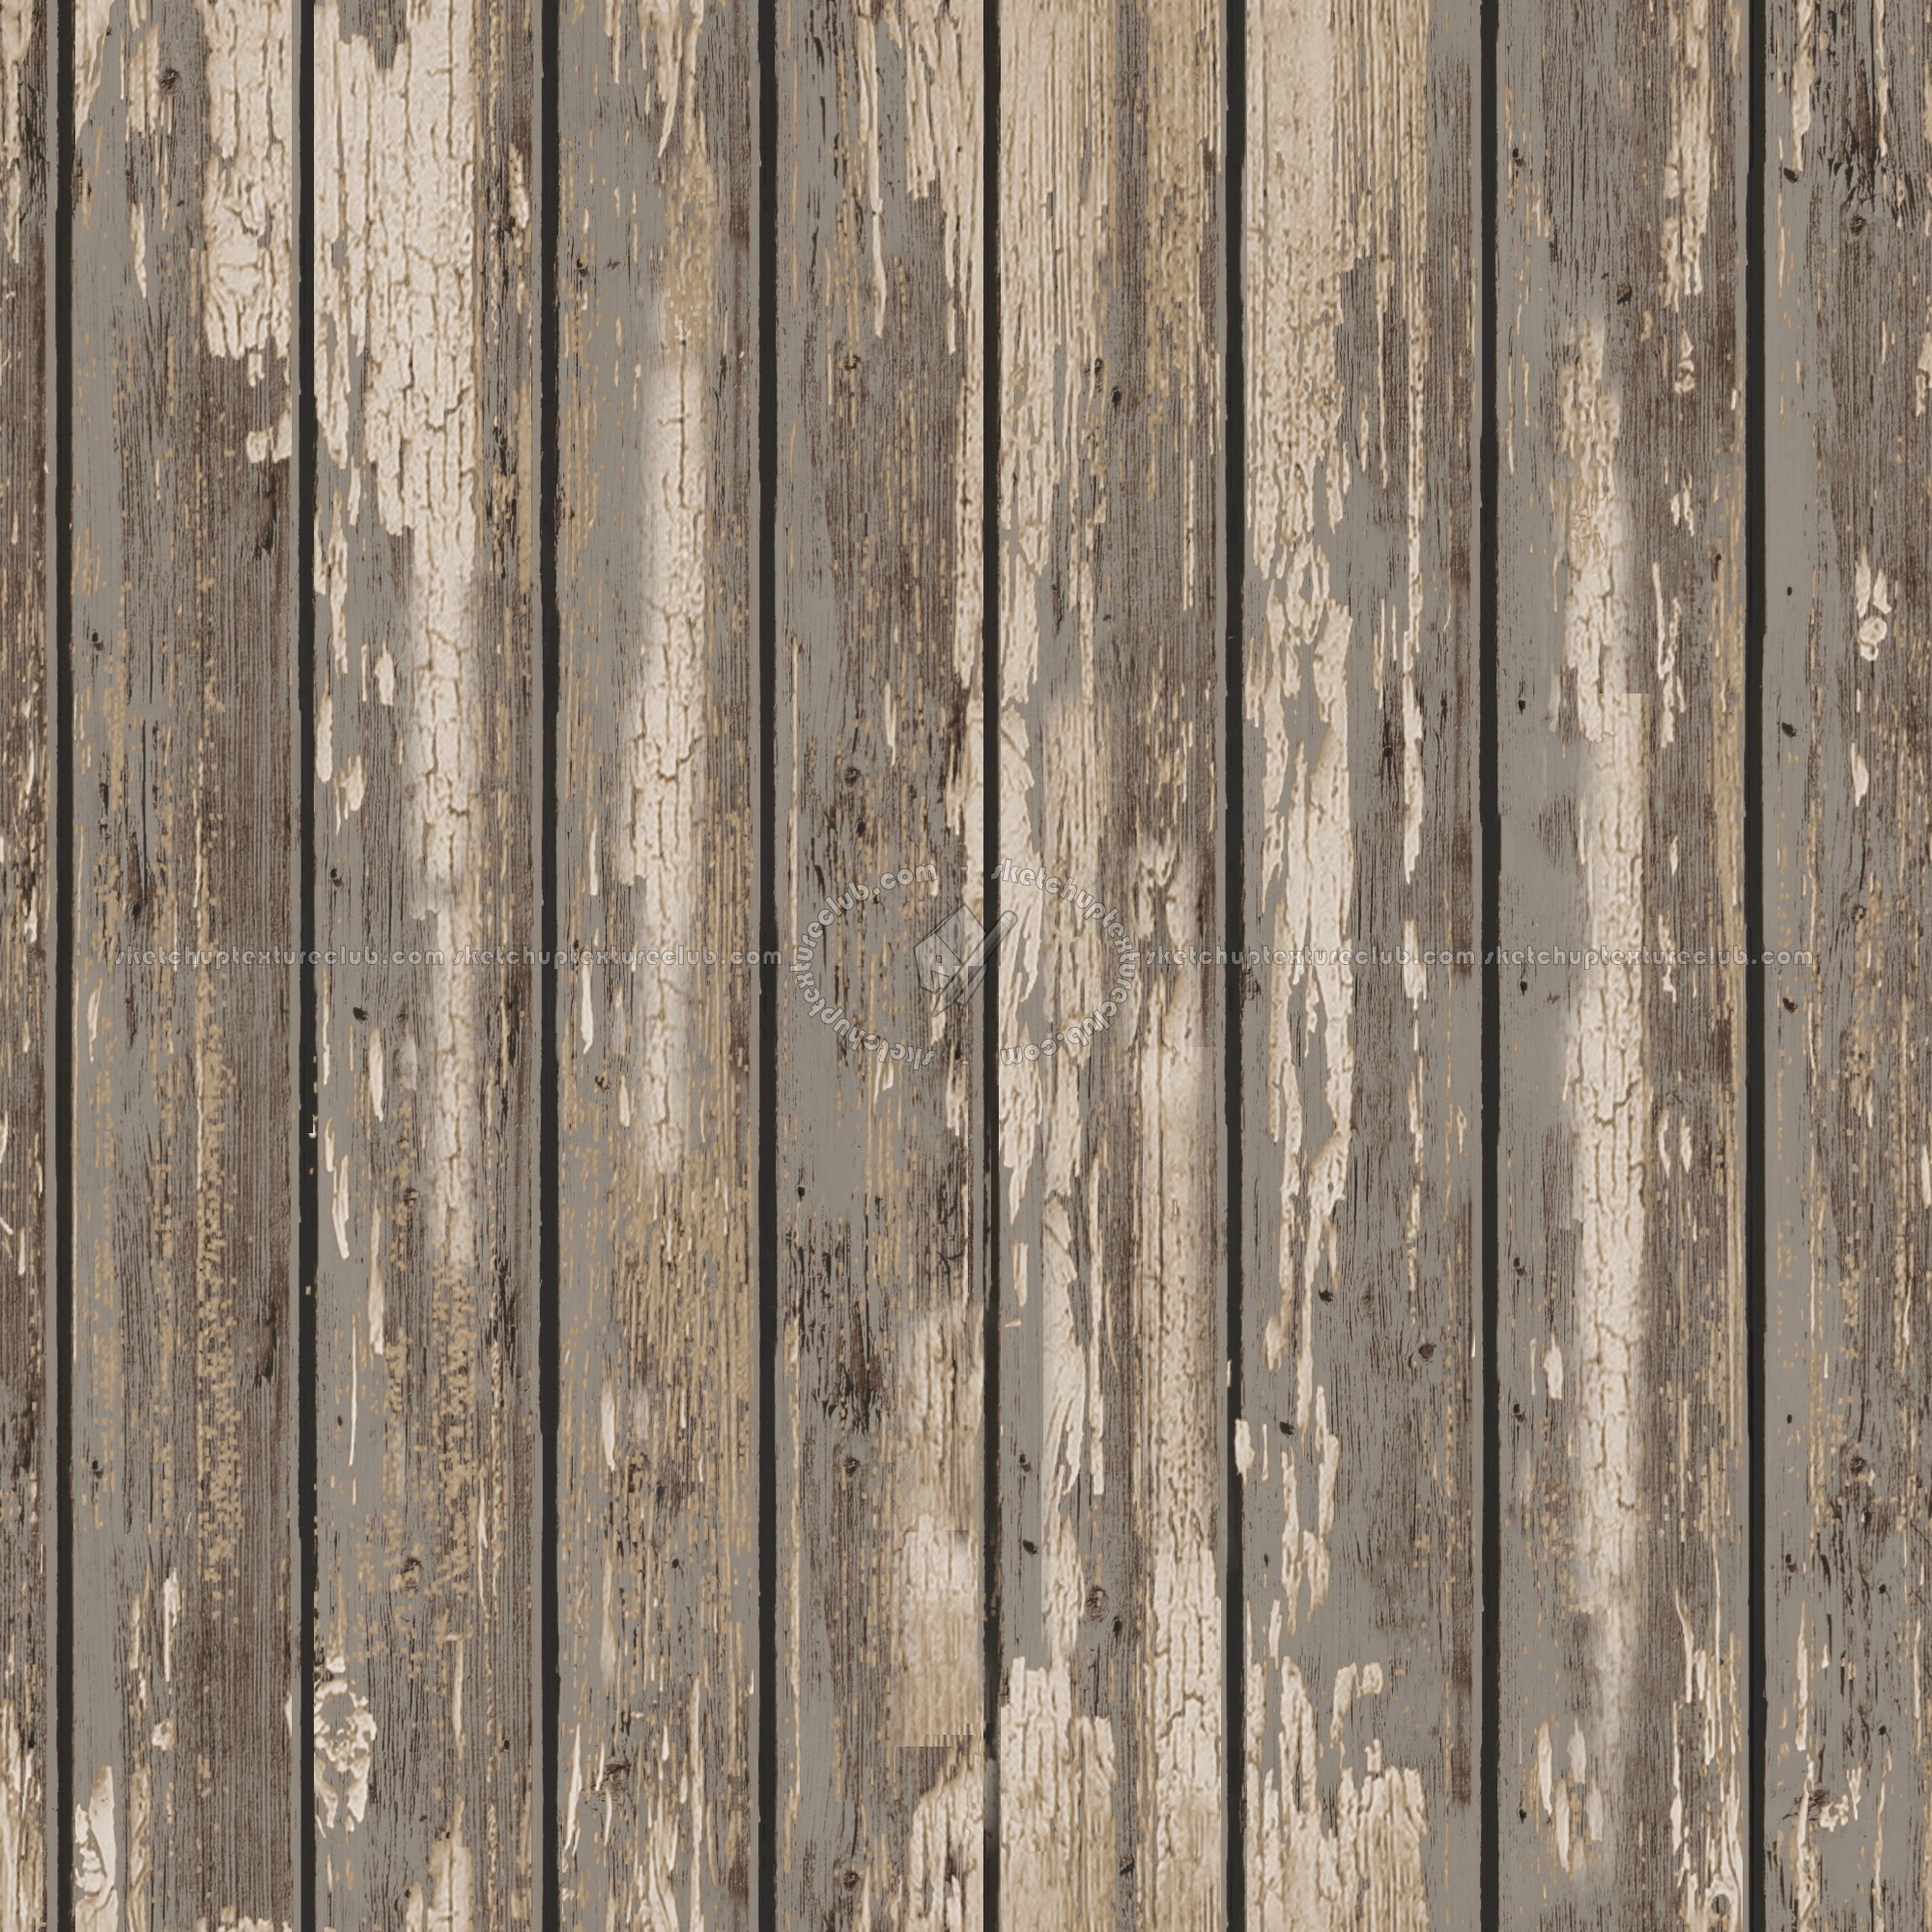 Varnished dirty planks textures seamless